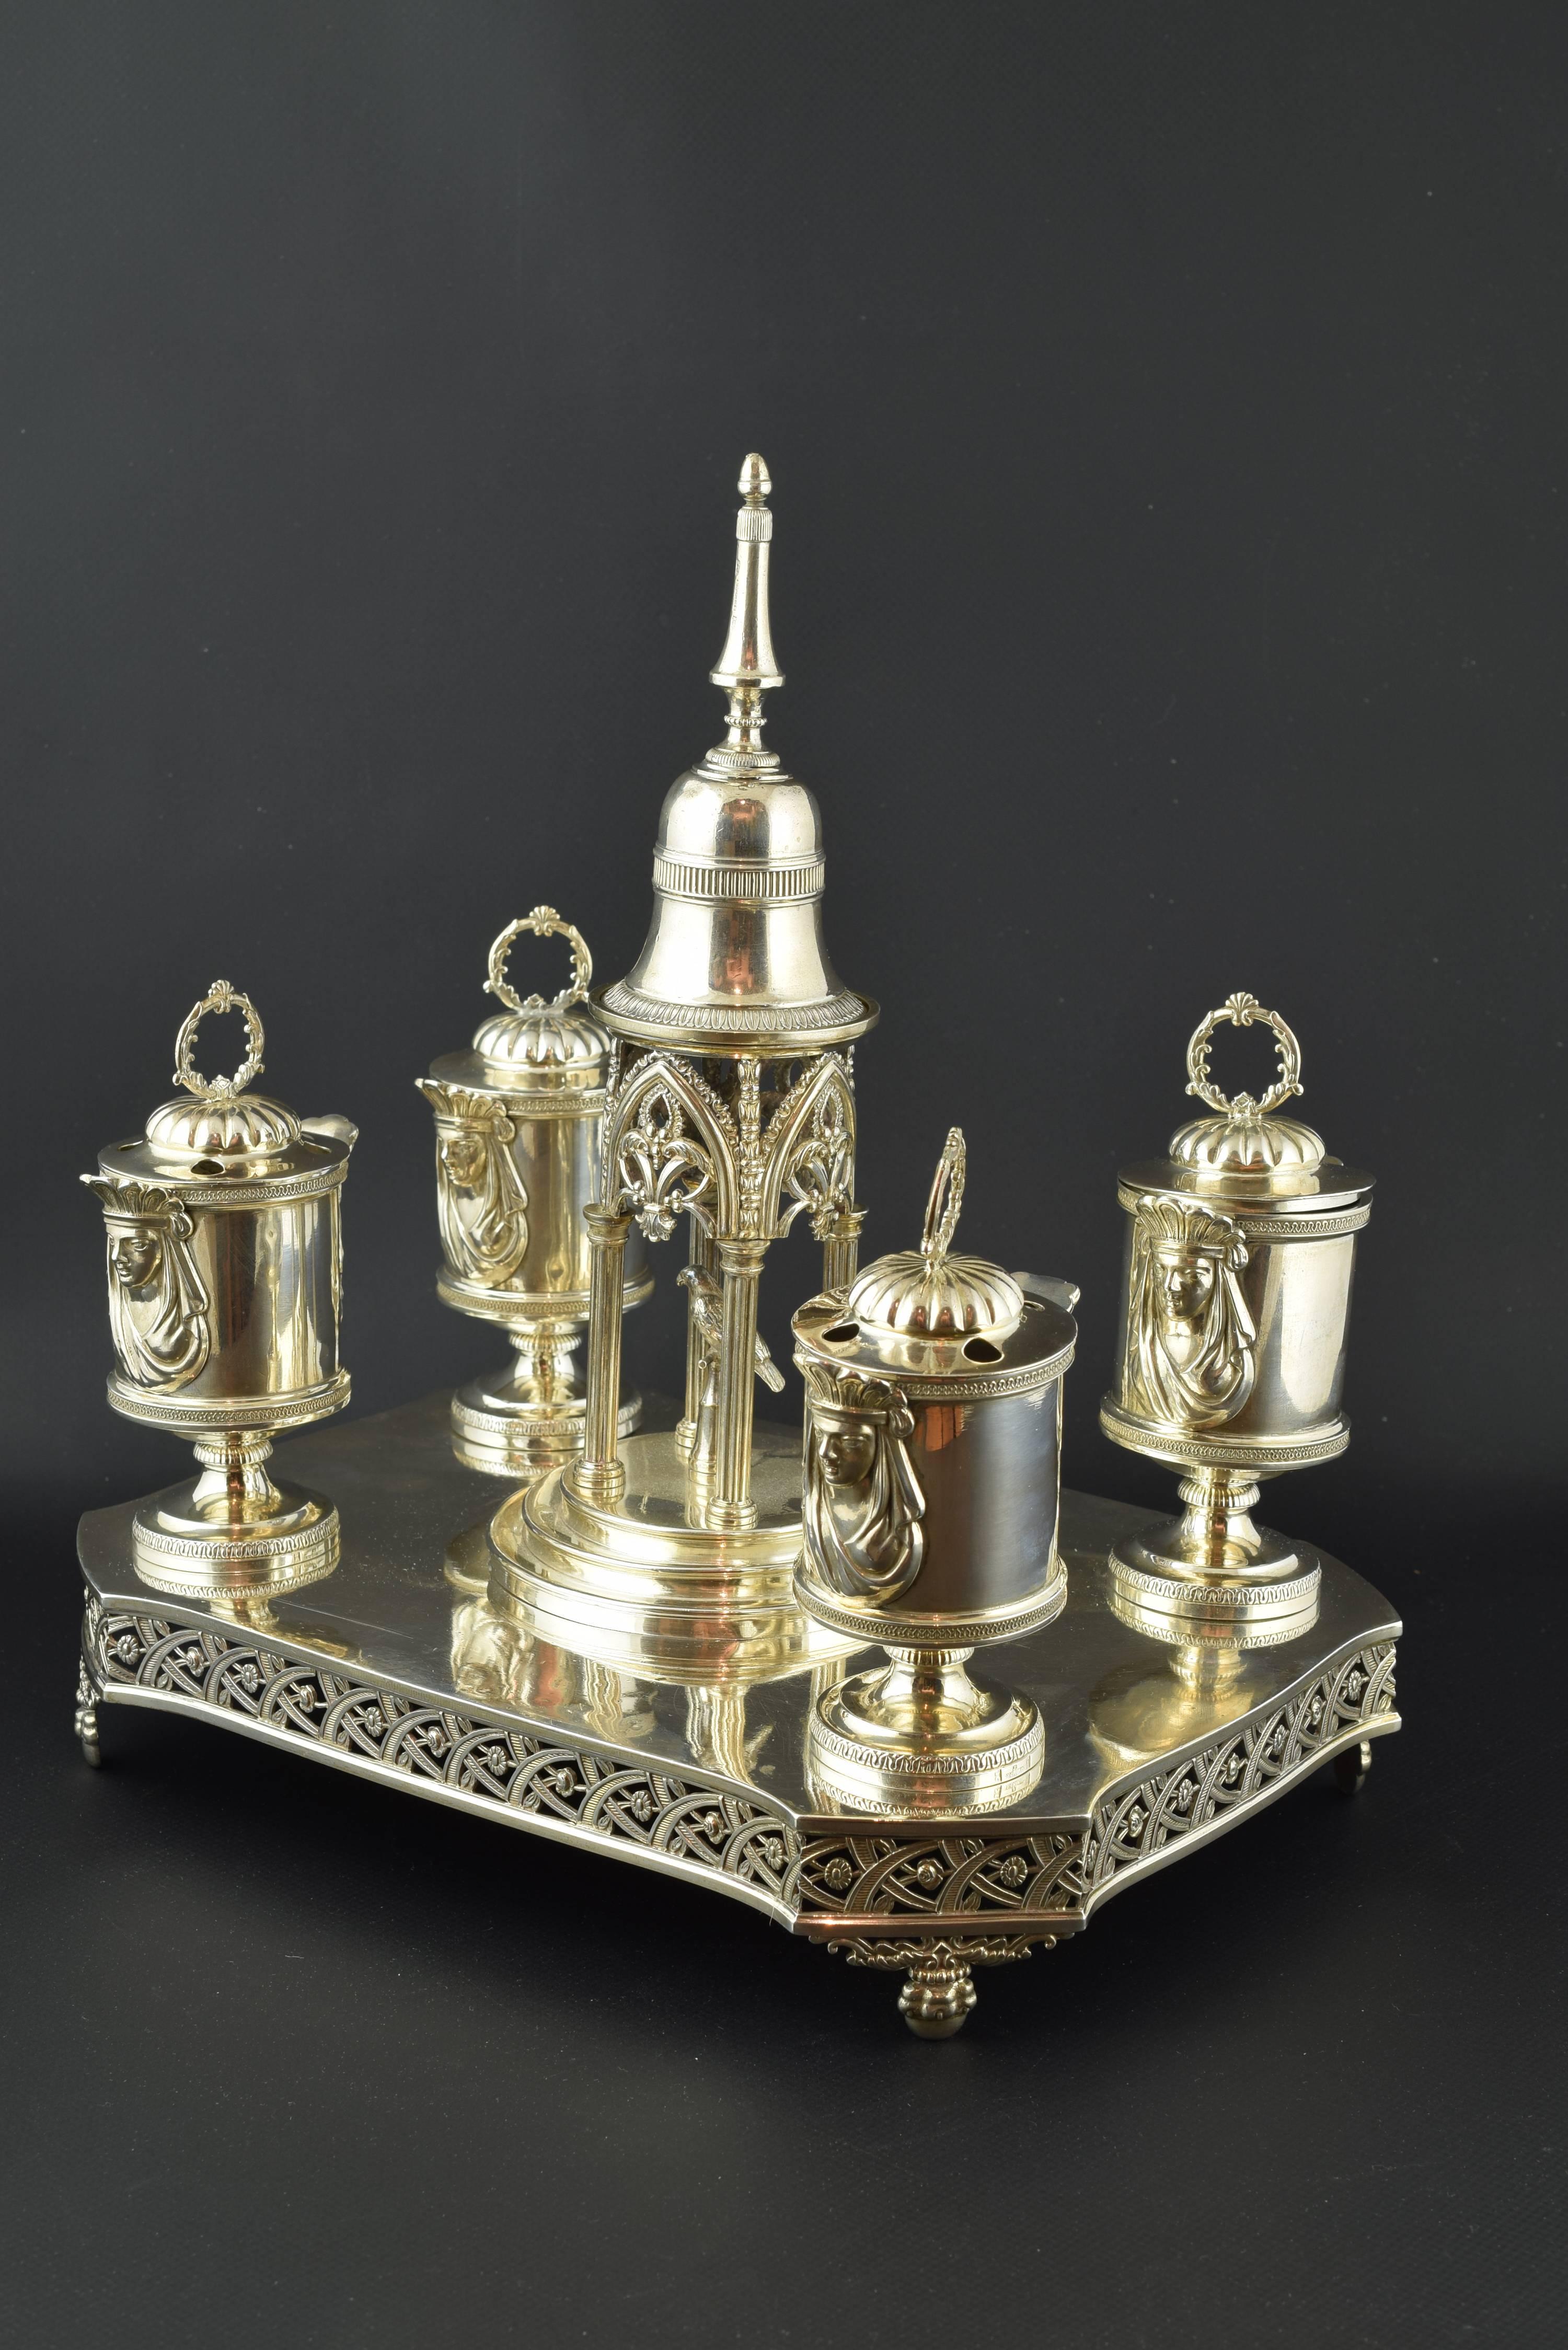 Solid silver writing set, Madrid, Juan Sellán (DOC. 1820s - circa 1886), Spain, 1845.
With hallmarks.
Writing set with four inkwells consists of a rectangular tray straight corners, decorated at the bottom with a drag strip bows and flowers. Each